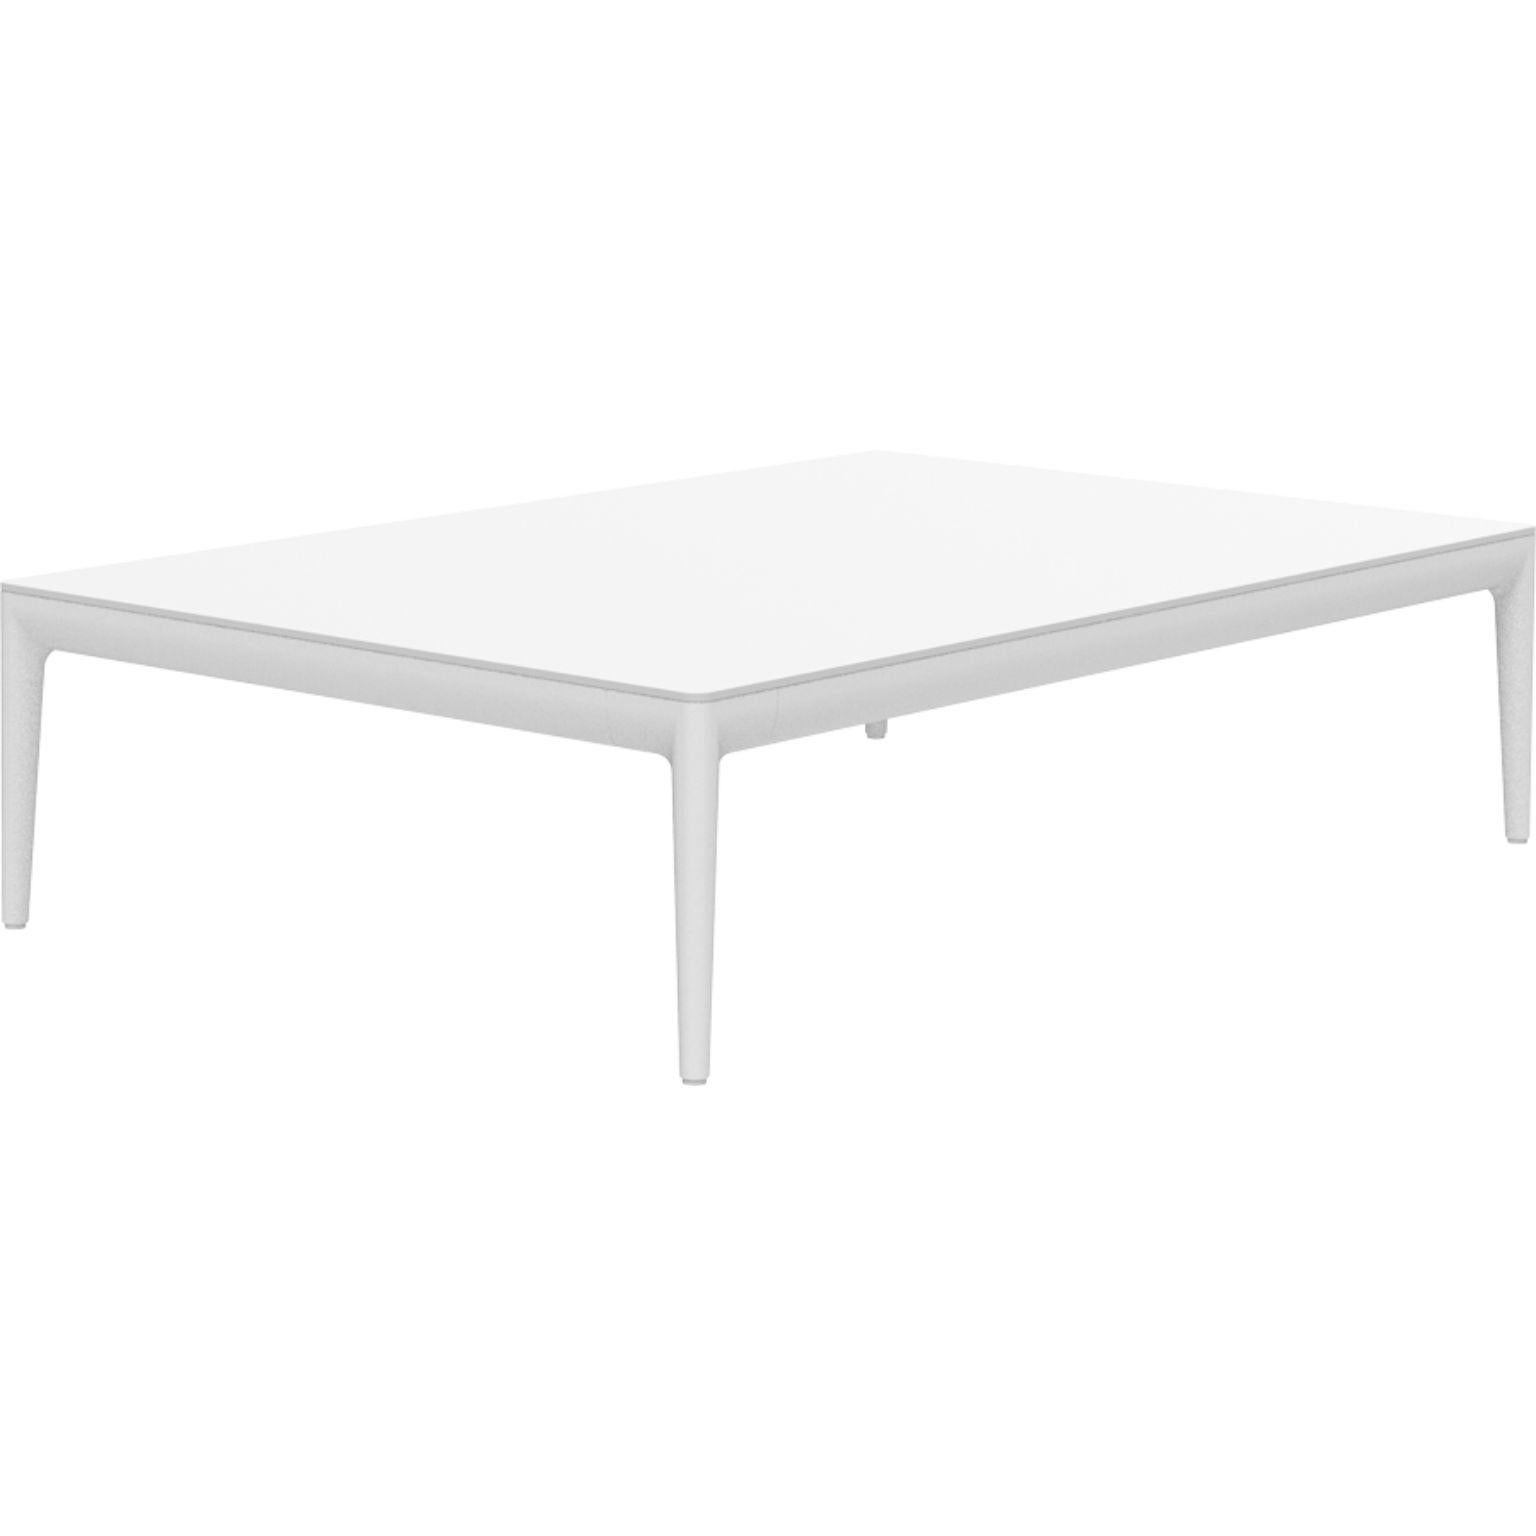 Ribbons White 115 coffee table by MOWEE
Dimensions: D76 x W115 x H29 cm
Material: Aluminum and HPL top.
Weight: 14.5 kg.
Also available in different colors and finishes. (HPL Black Edge or Neolith top). 

An unmistakable collection for its